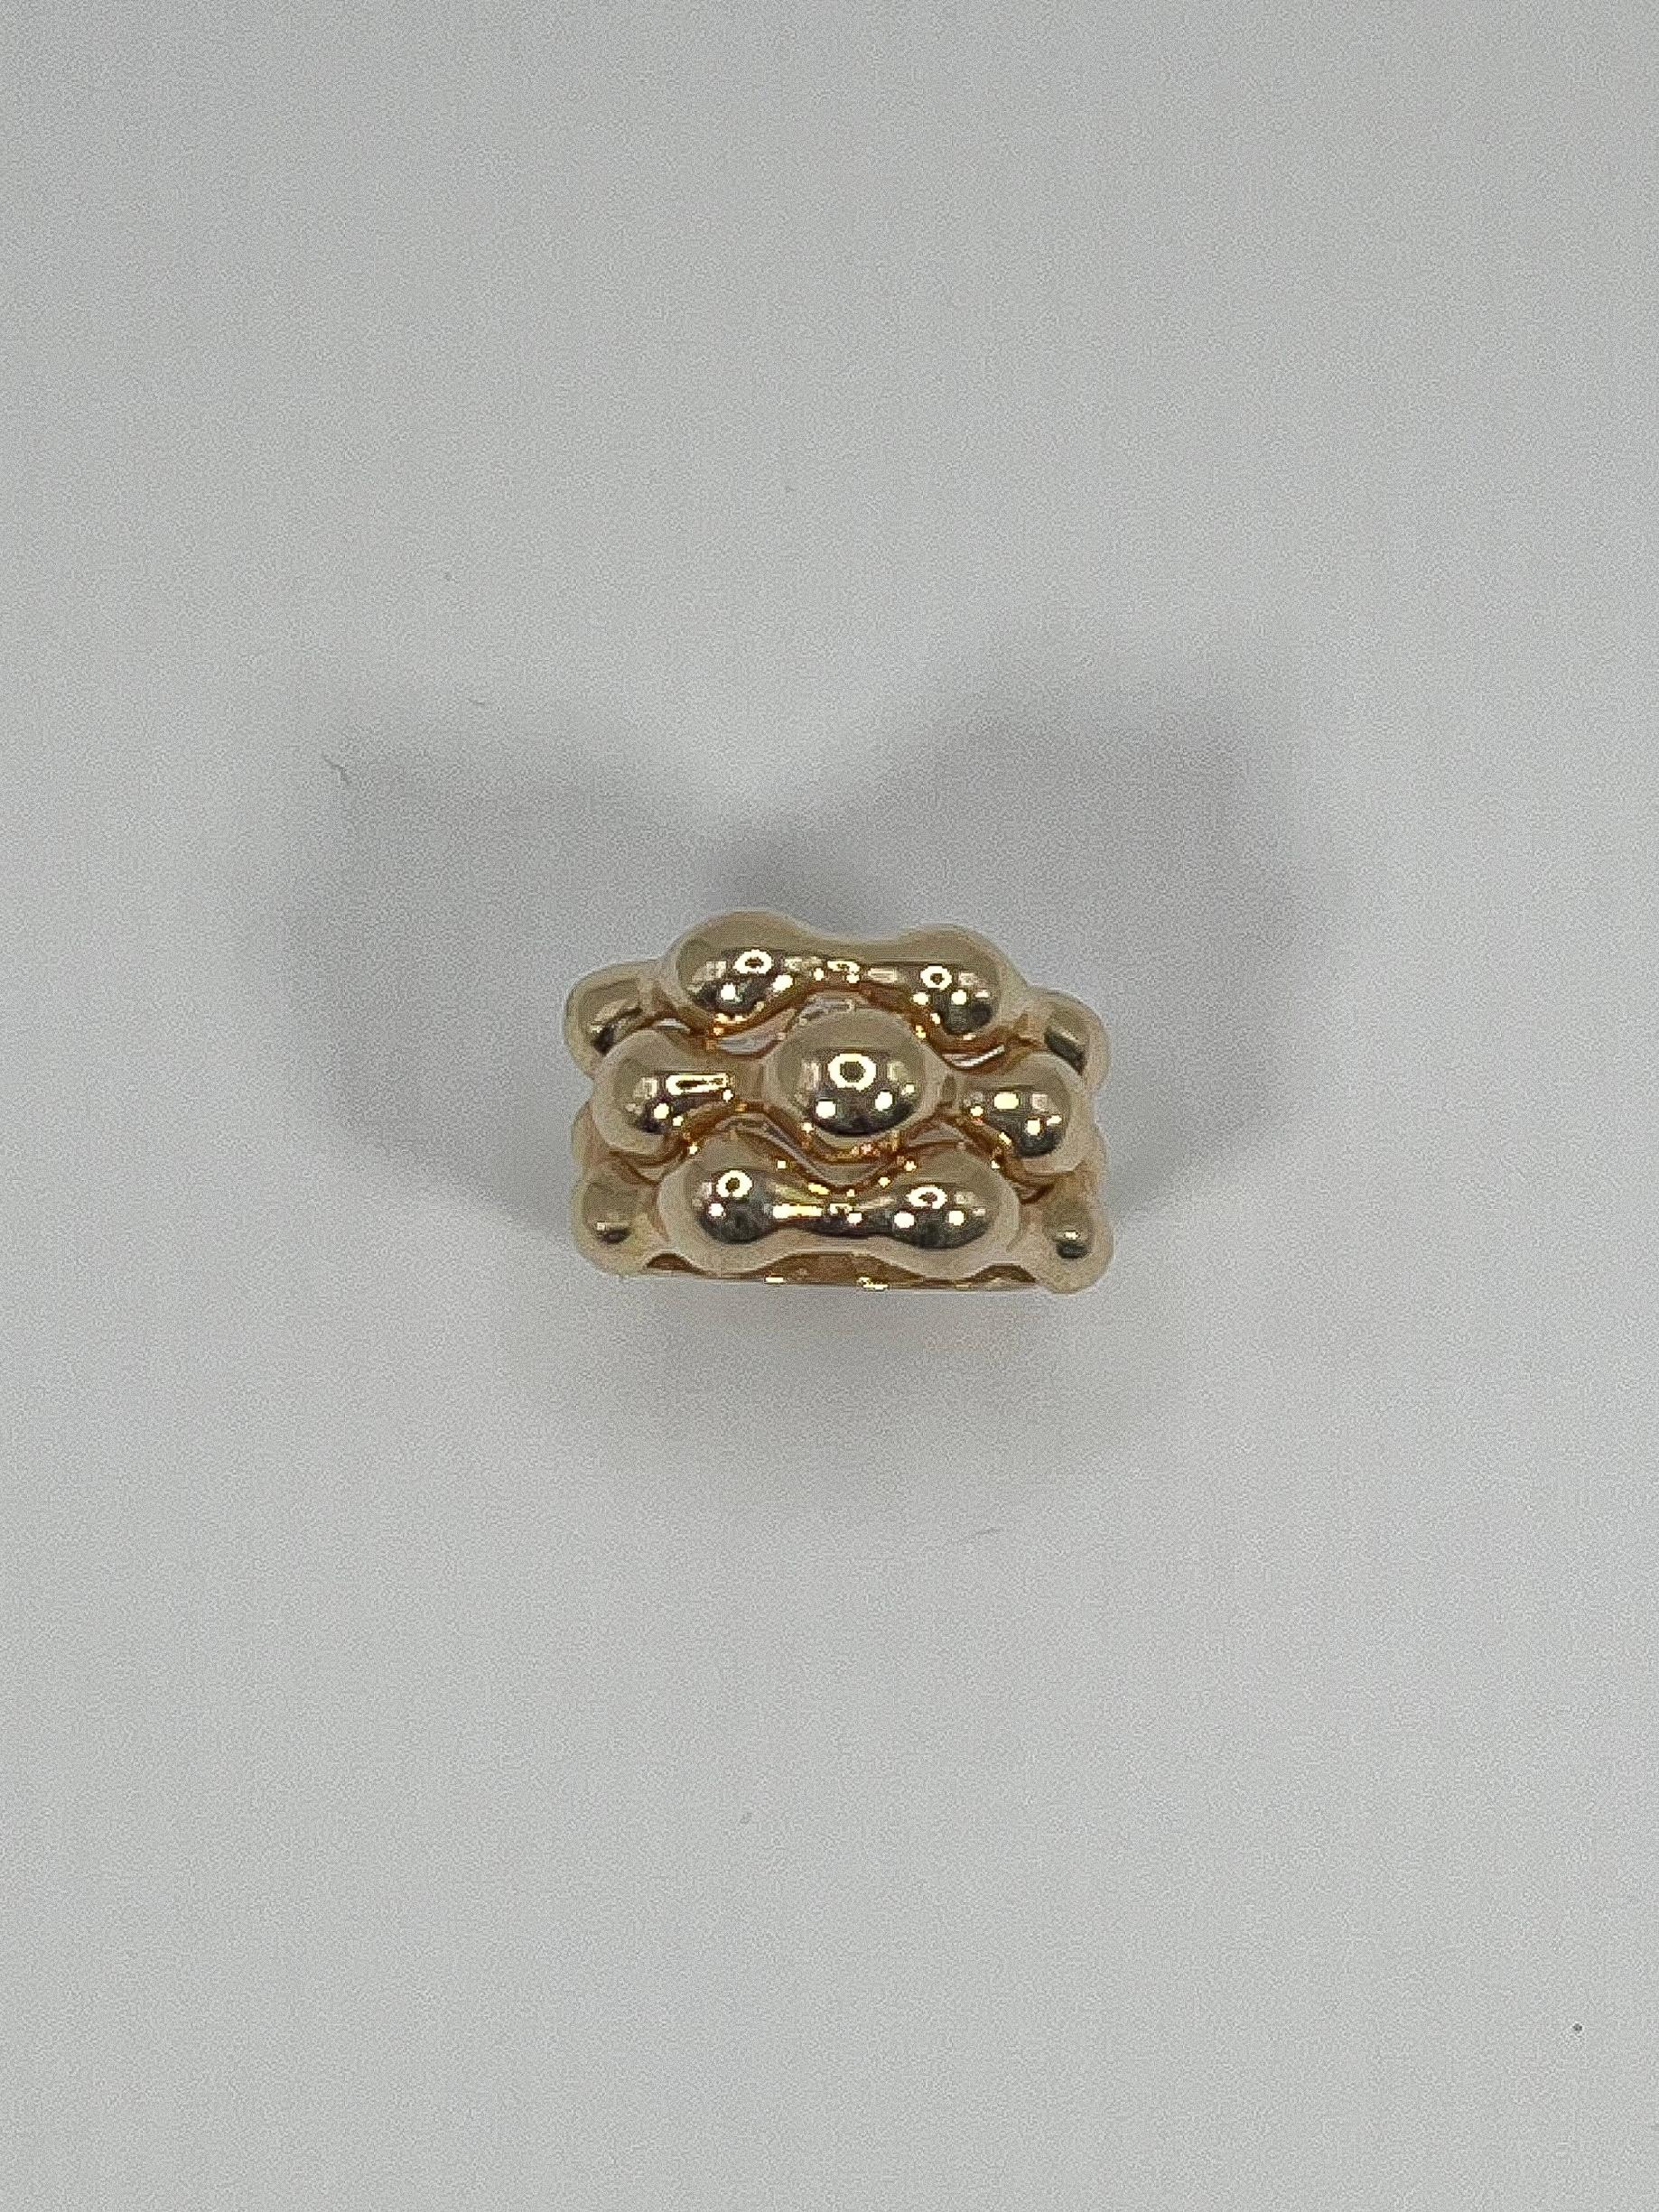 14K Yellow Gold Fashion Ring, the size of this ring is 6 1/4. The total weight is 7.7 Grams dimensions of the top of ring is 22MM wide by 15mm.